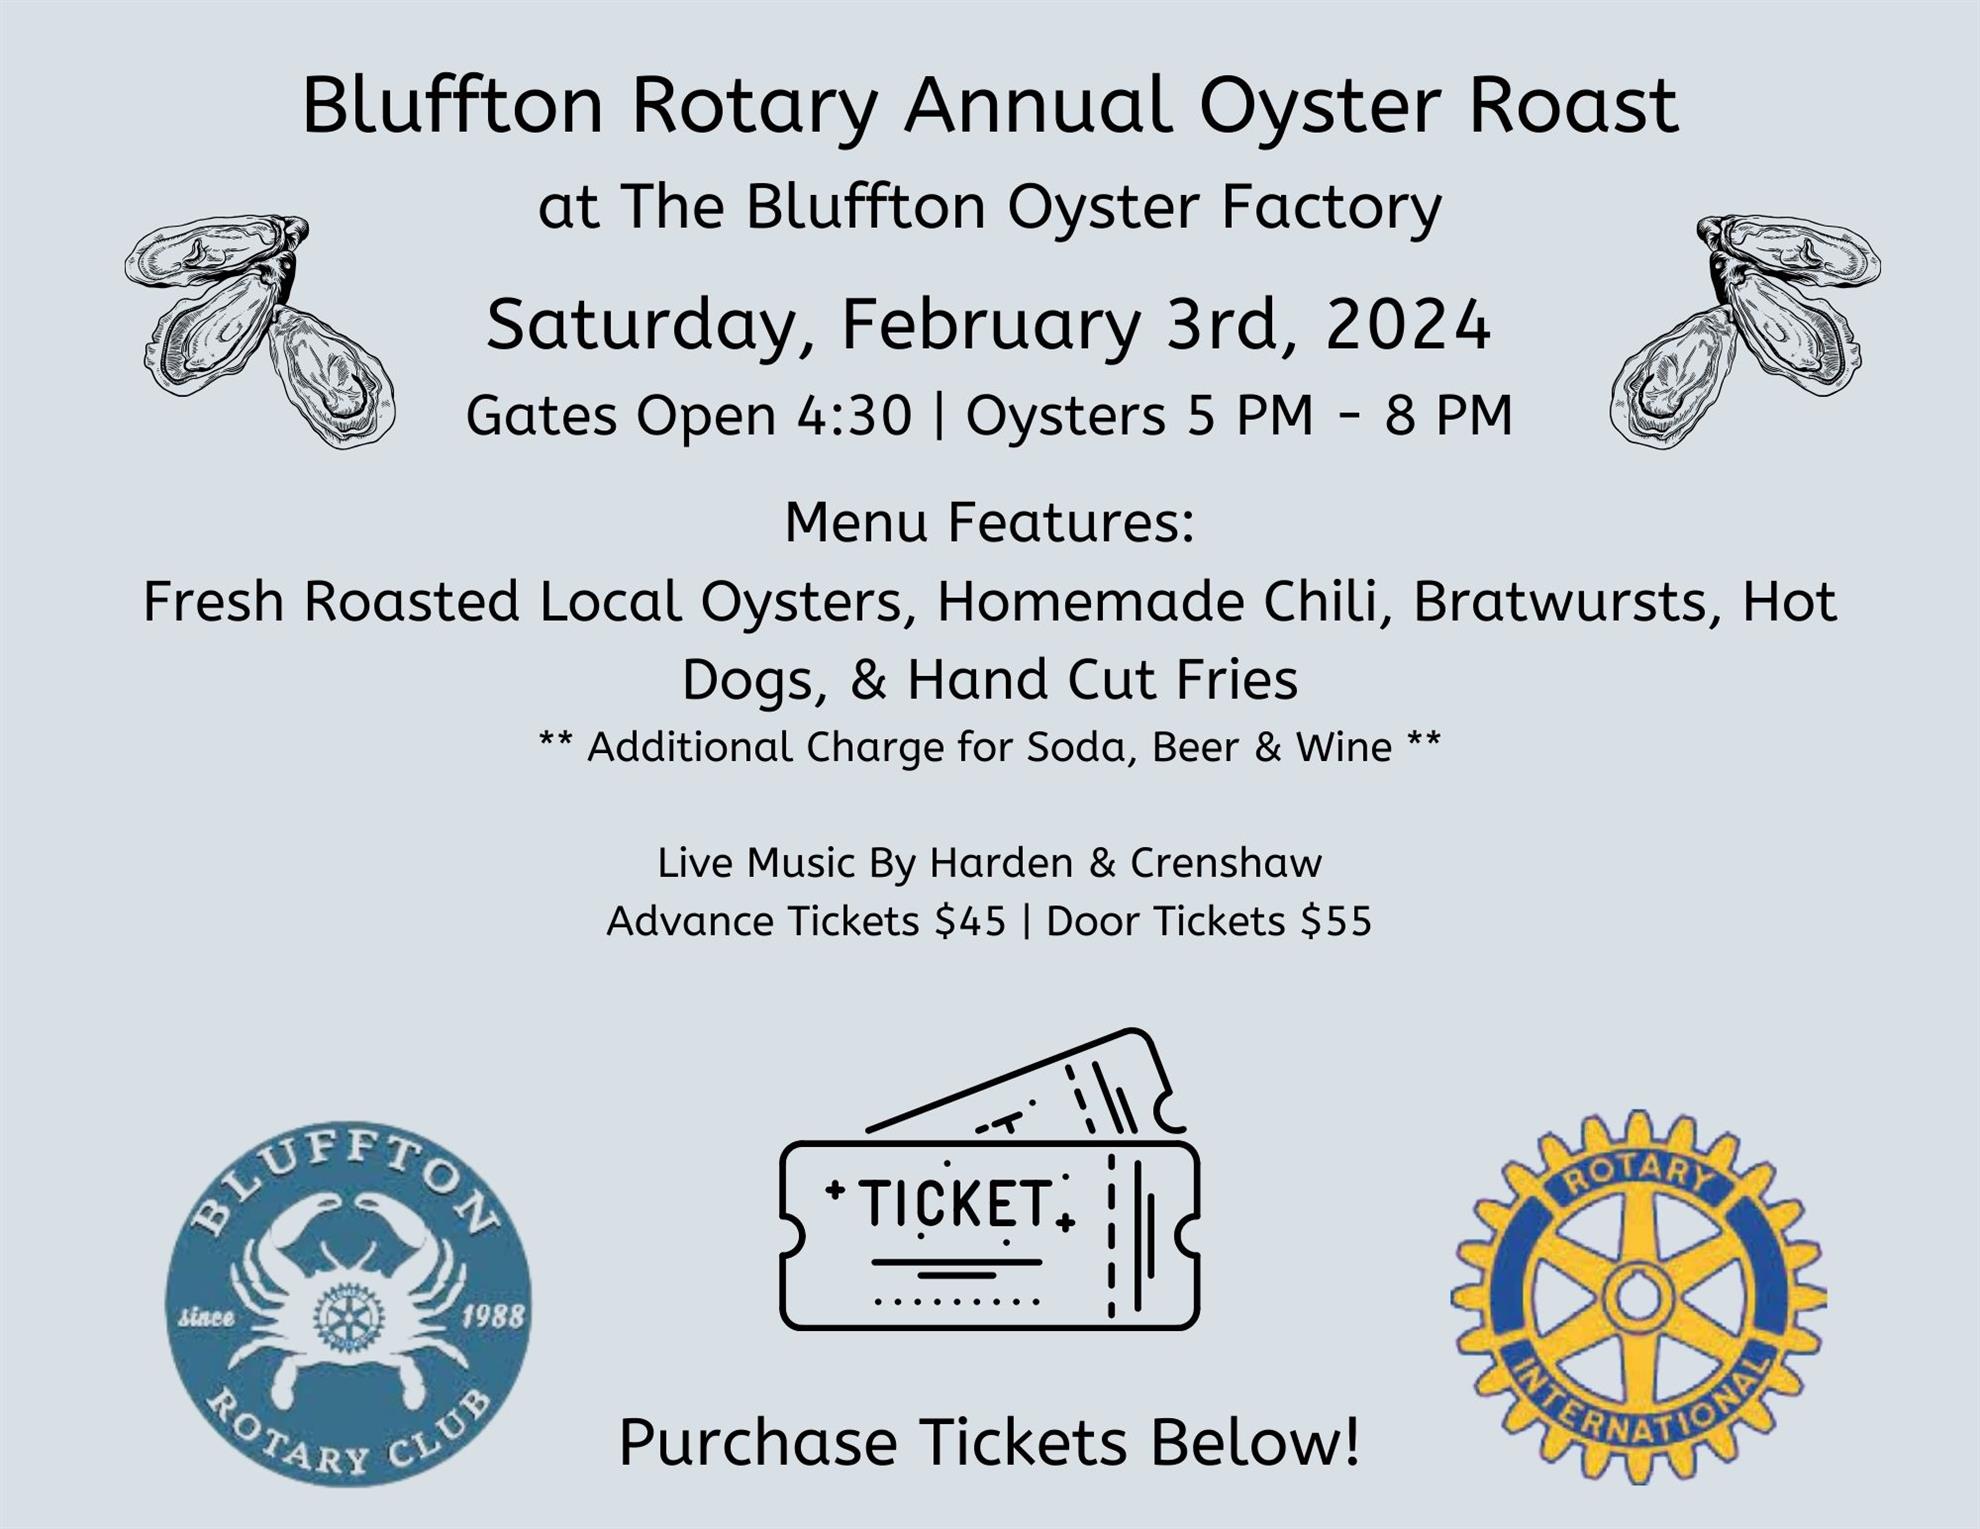 Stories  Rotary Club of Bluffton